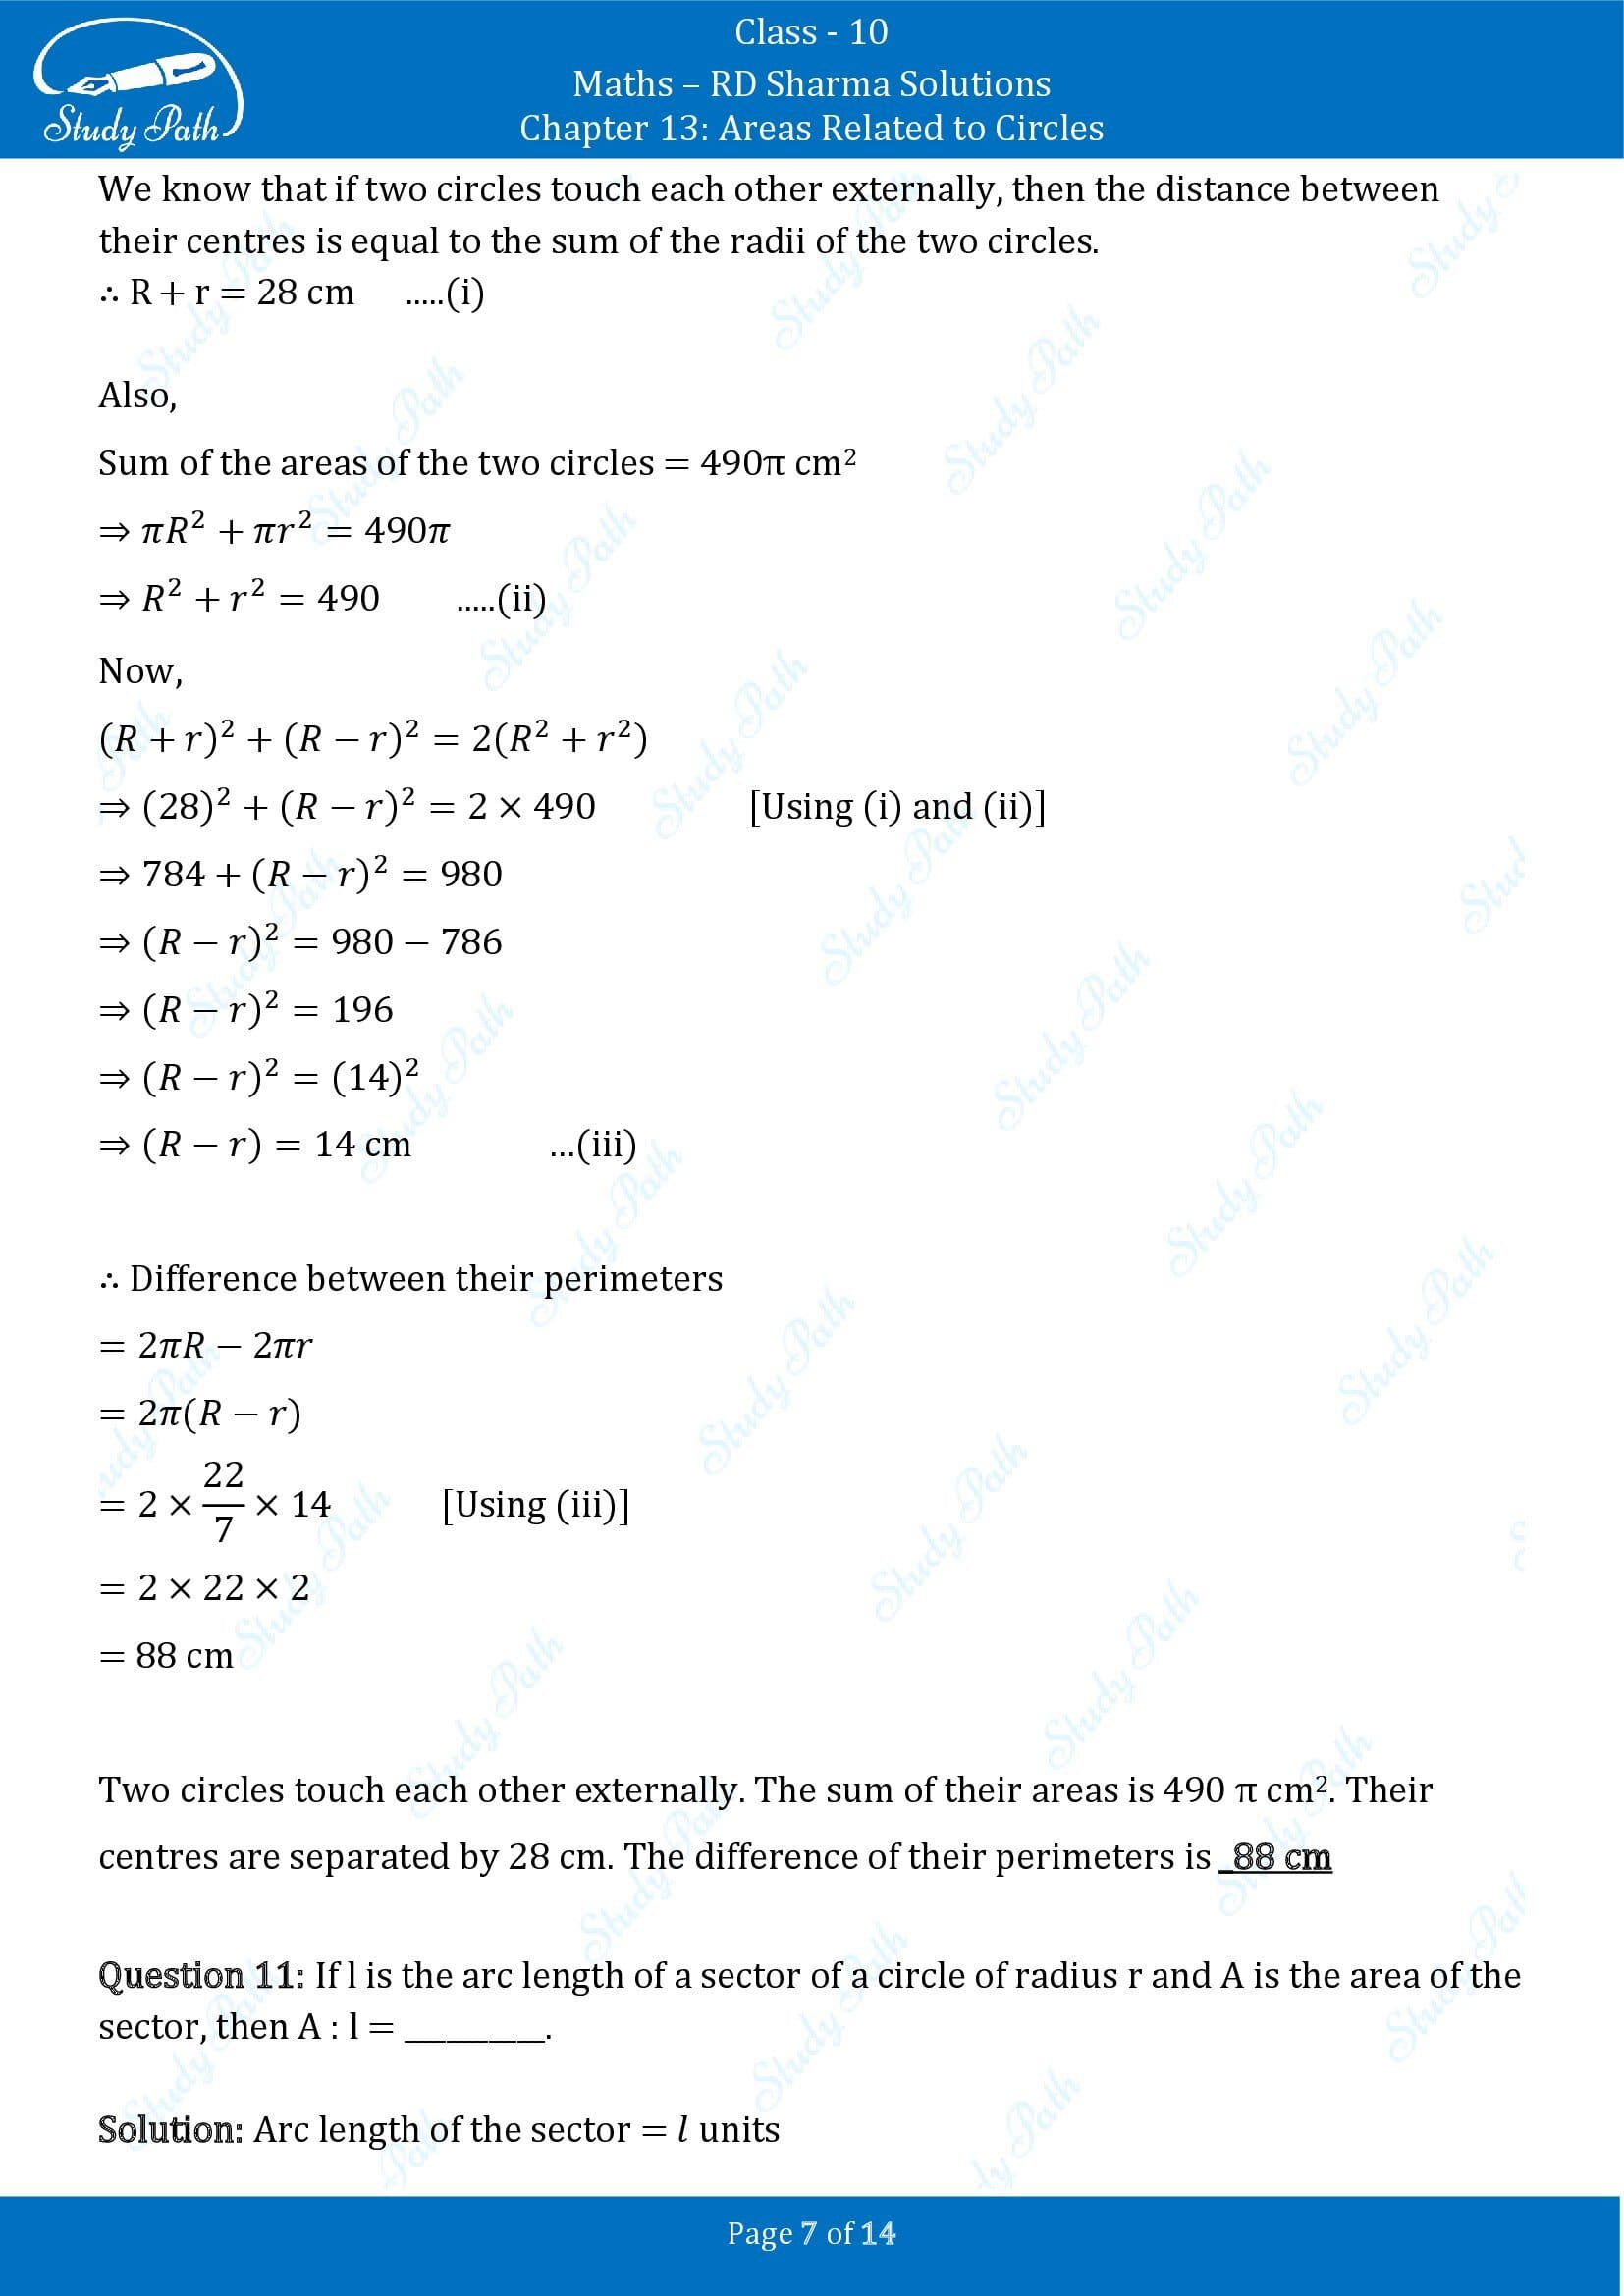 RD Sharma Solutions Class 10 Chapter 13 Areas Related to Circles Fill in the Blank Type Questions FBQs 00007